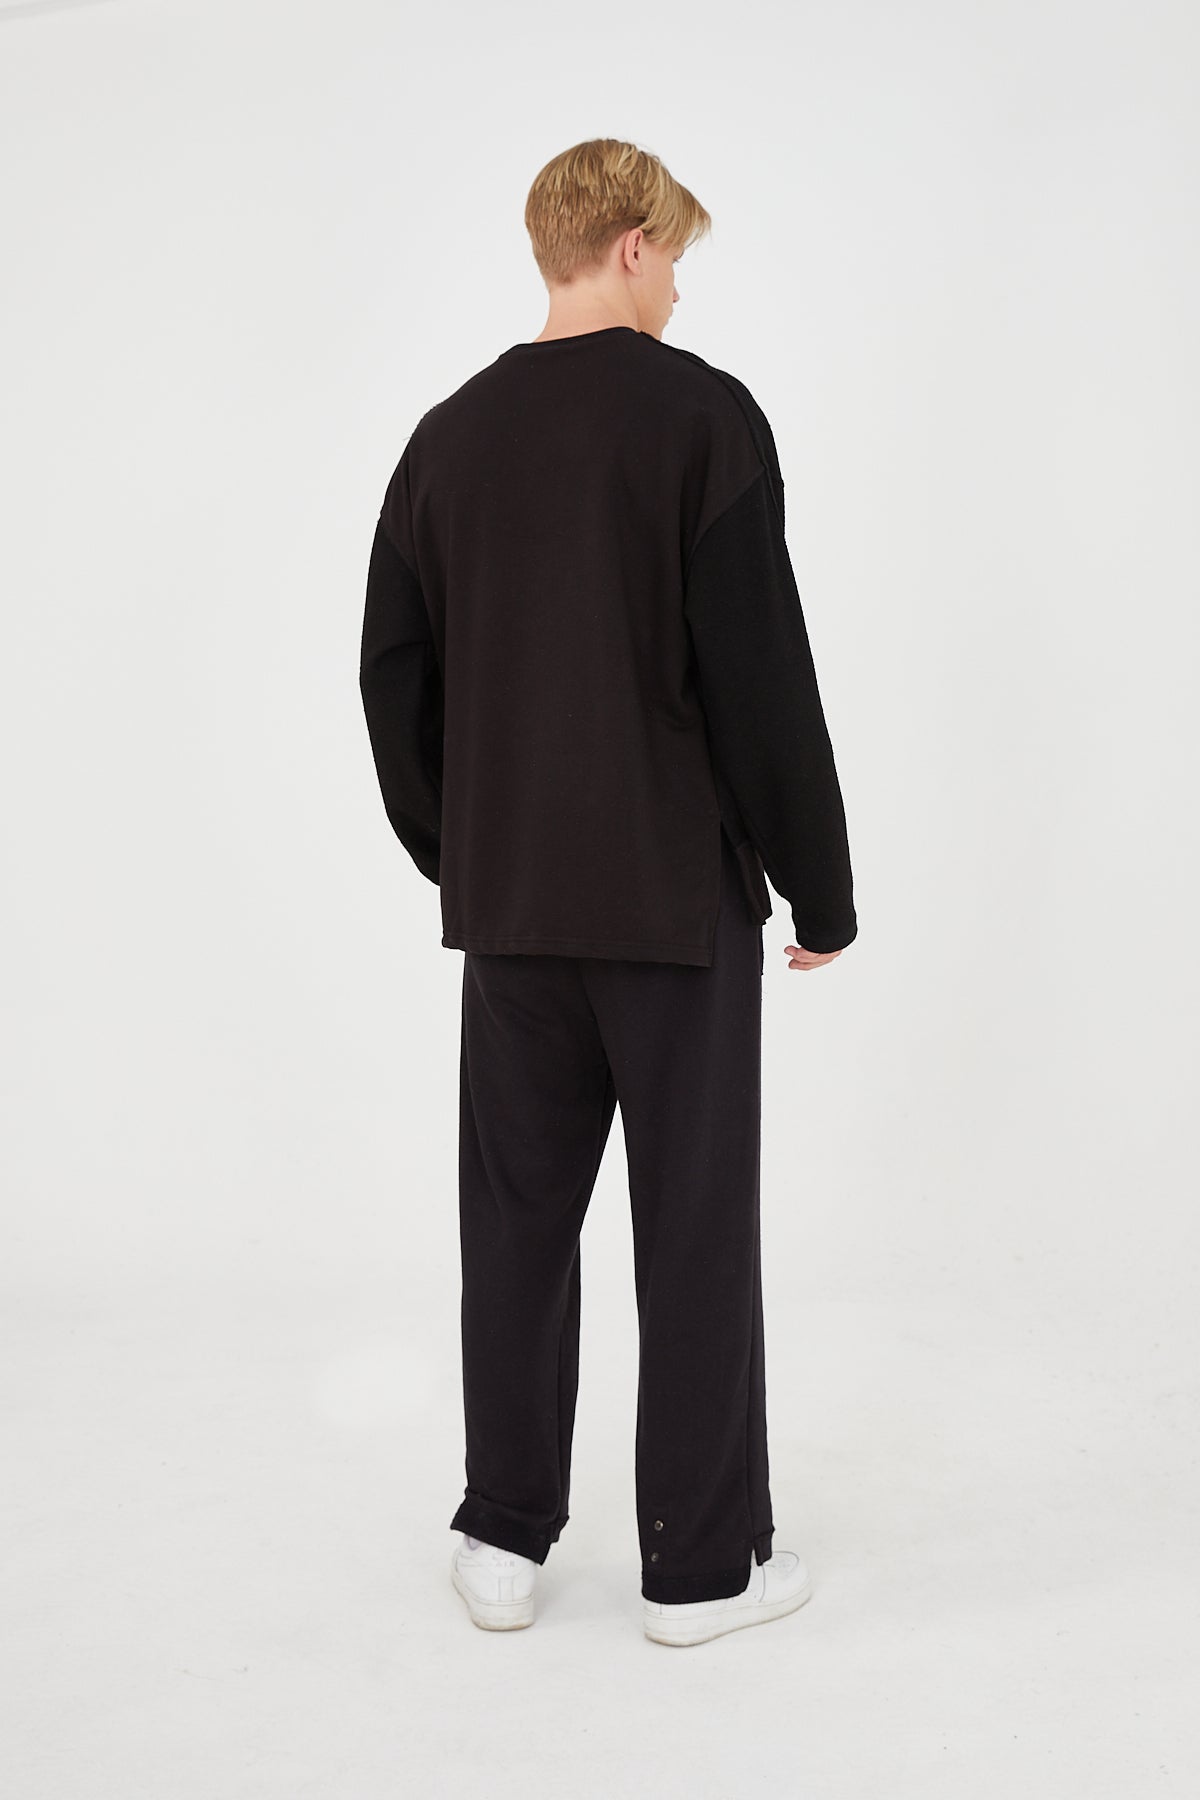 TRACKSUIT - THE PERFECT OUTFIT - BLACK